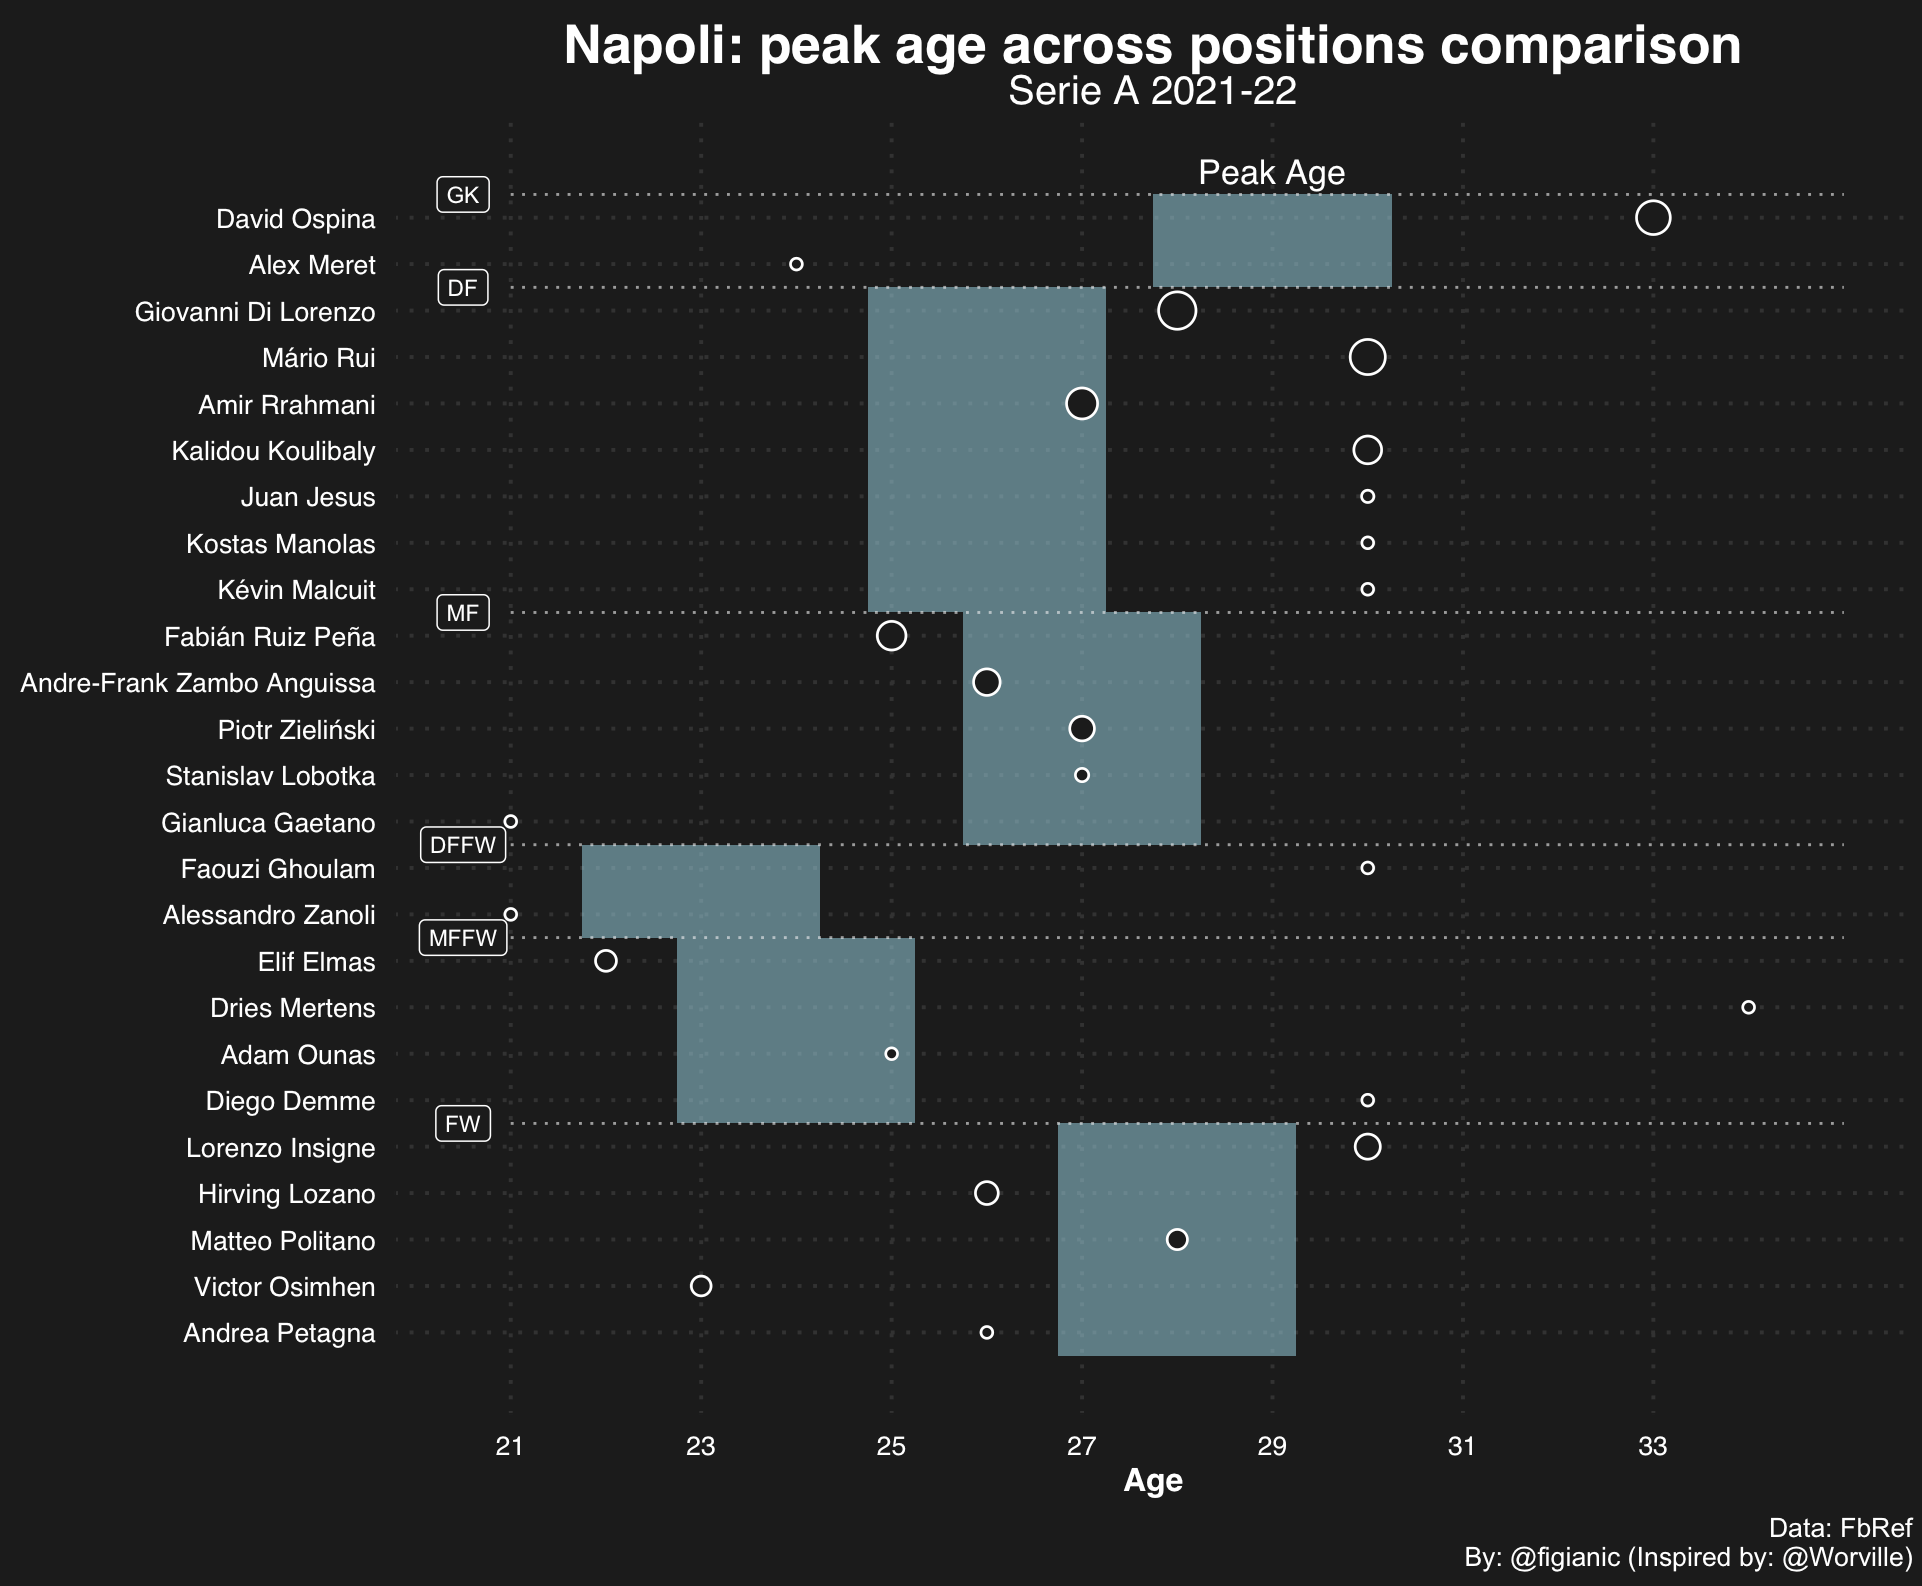 Do Serie A teams invest in young talents or rely on accomplished players?